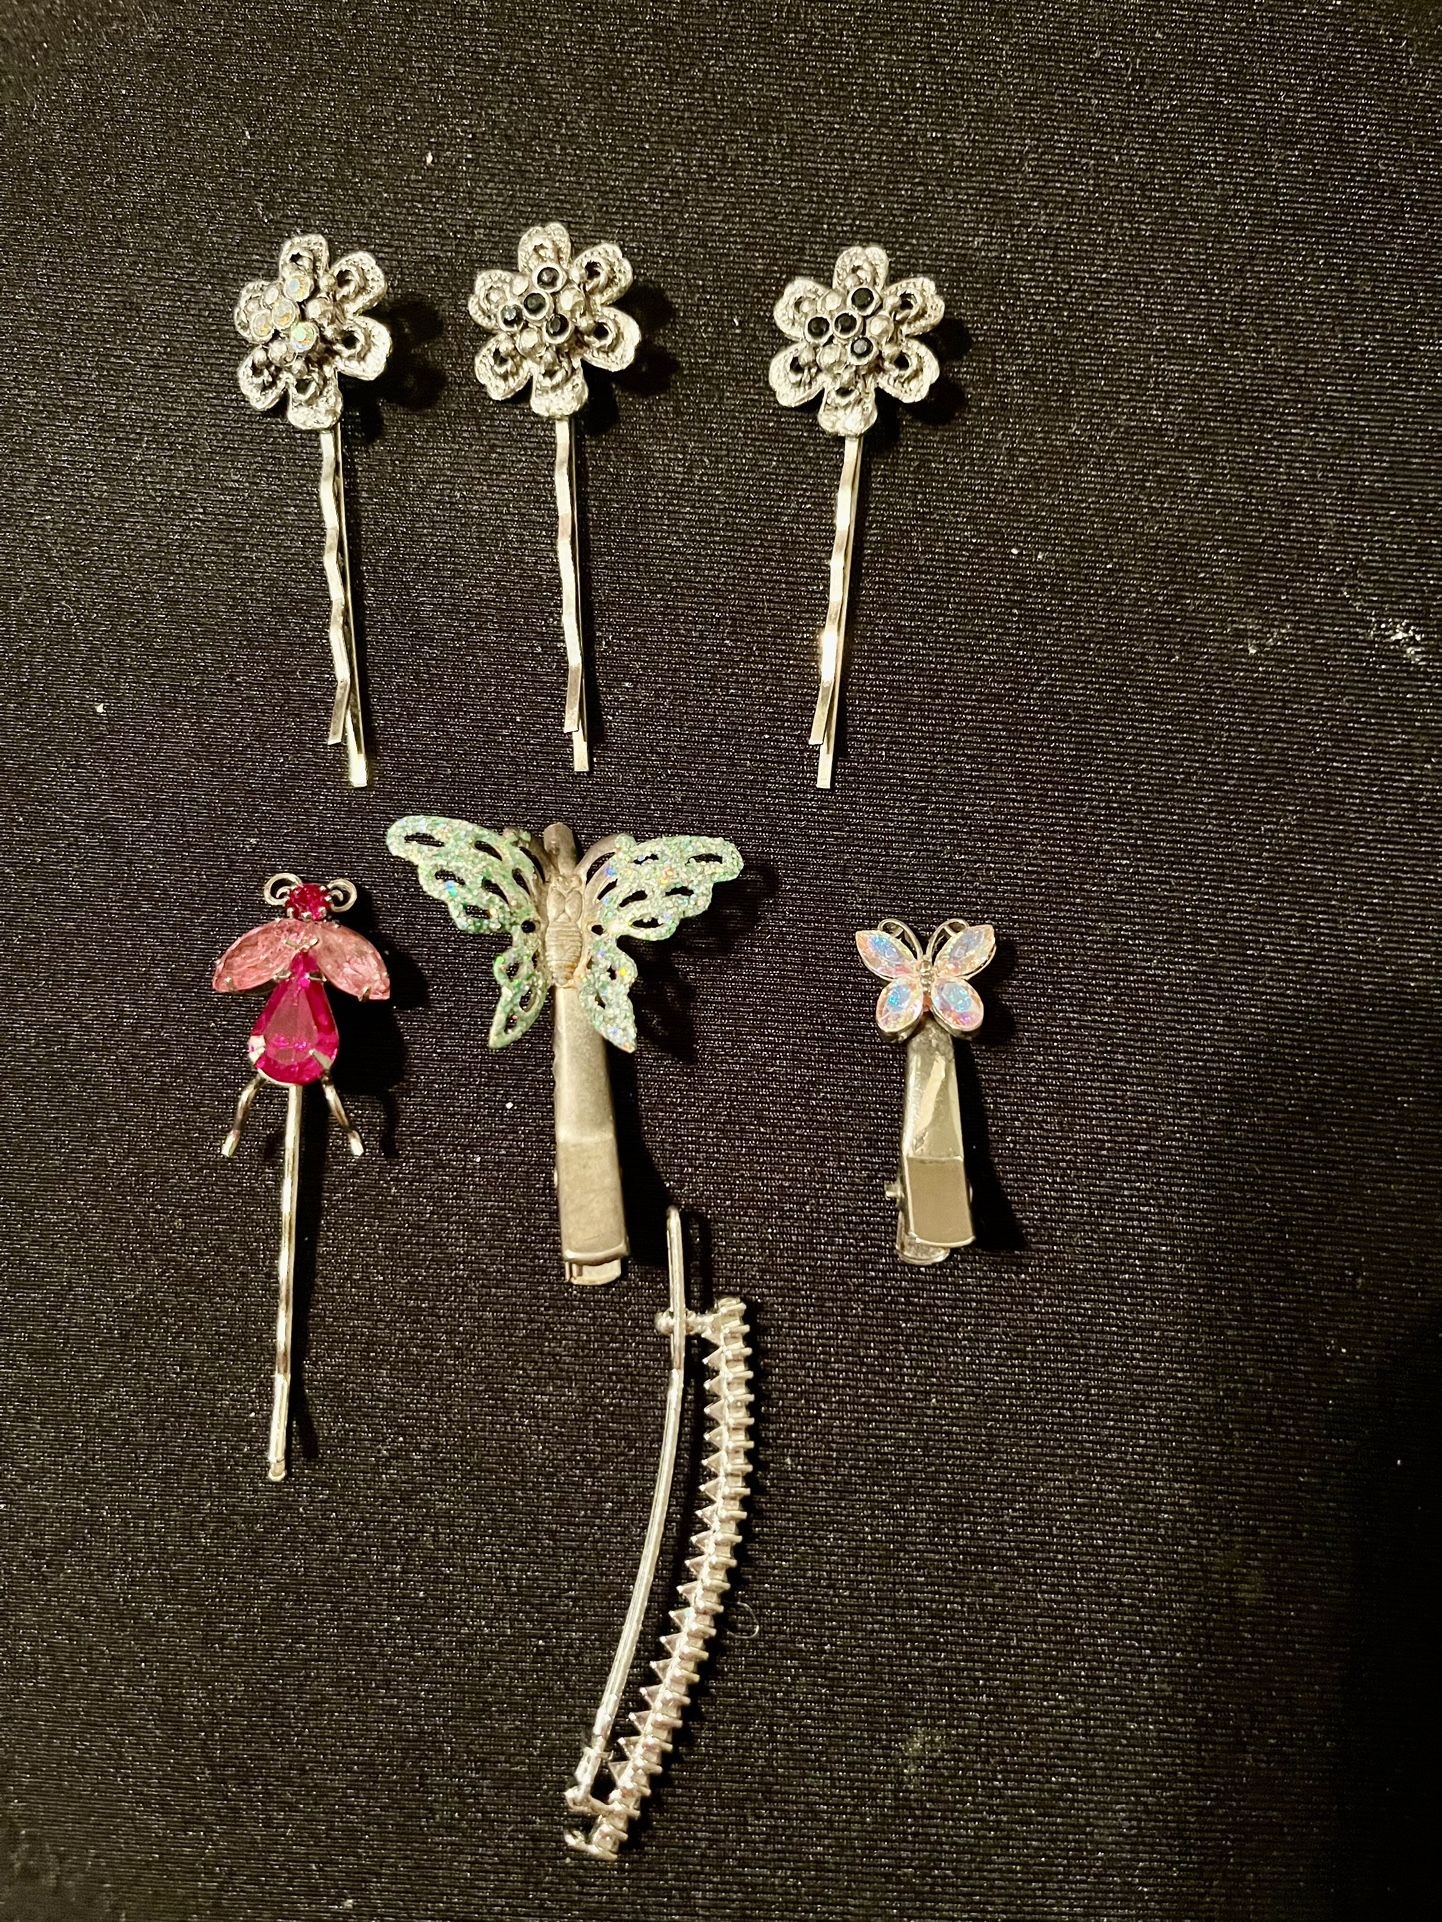 7 Different Style Silver Hair Pins Very Unique 